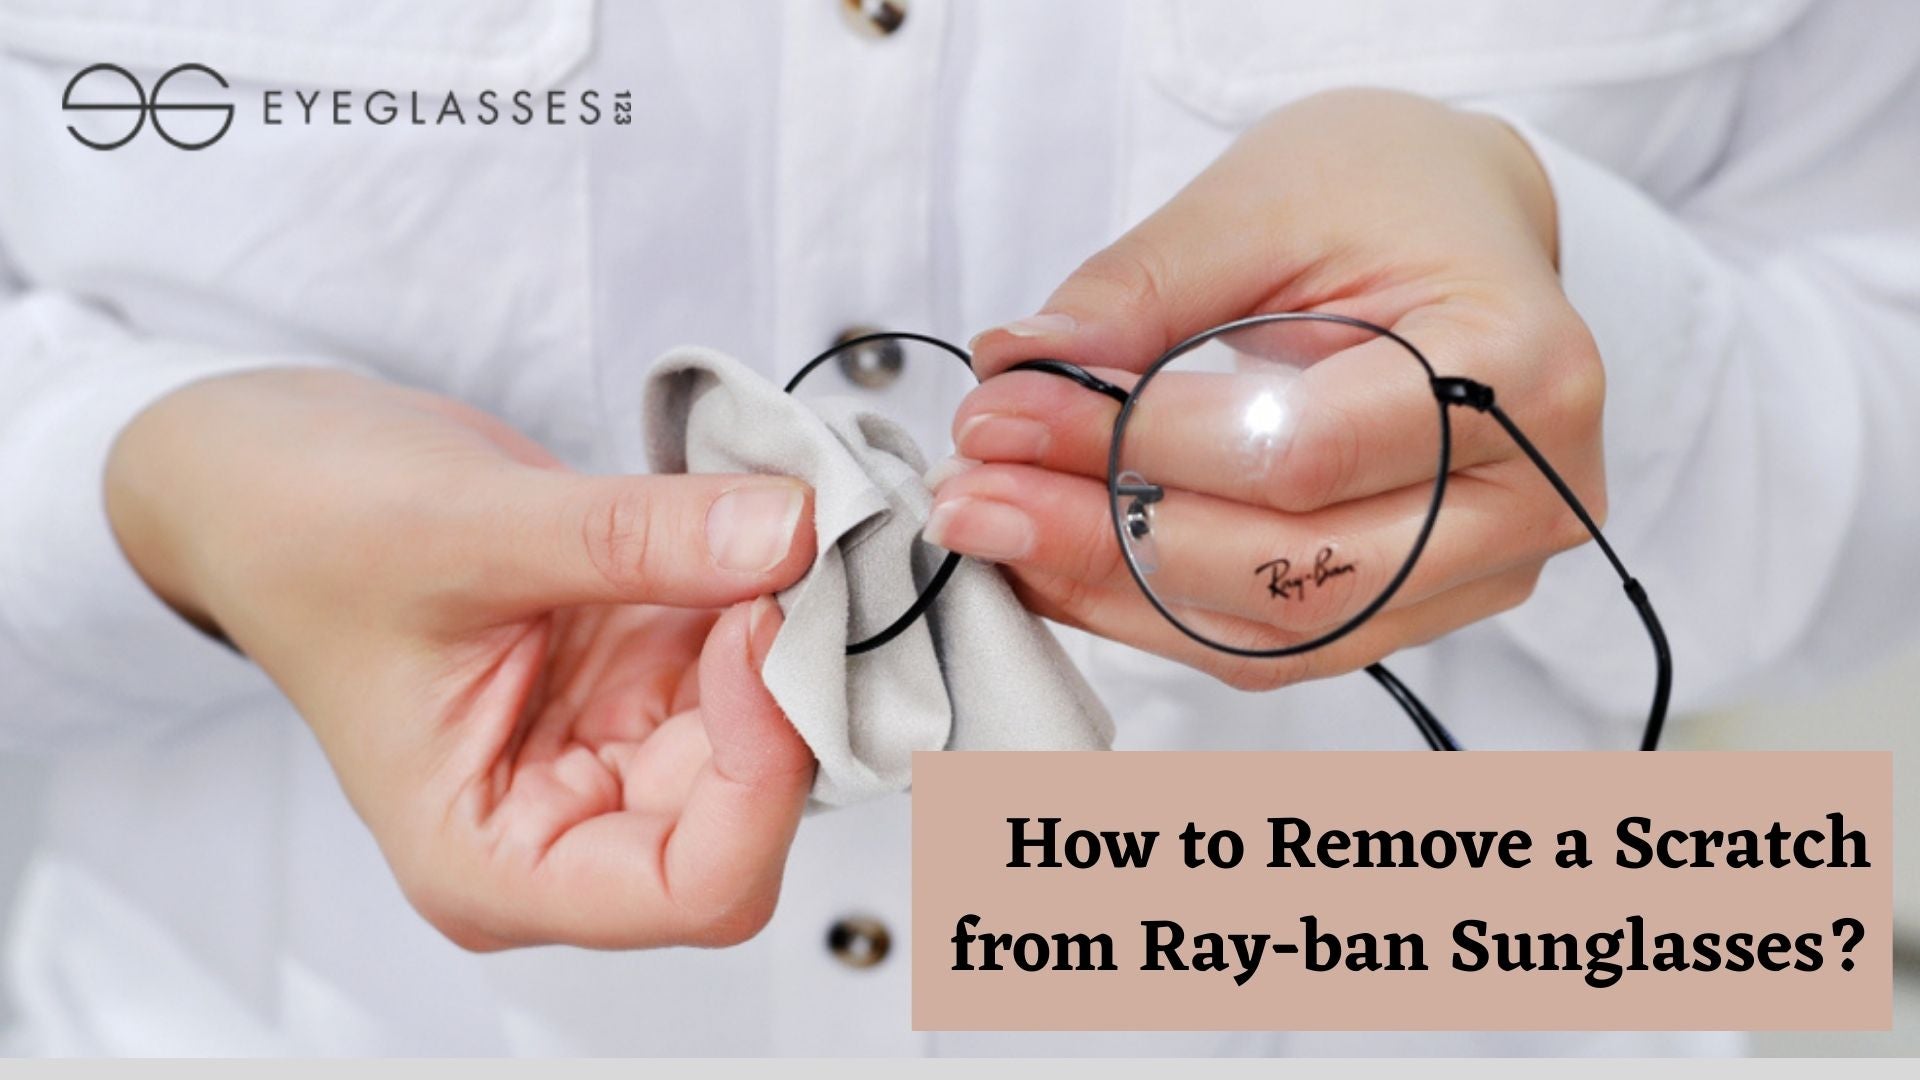 How to Remove a Scratch from Ray-ban Sunglasses